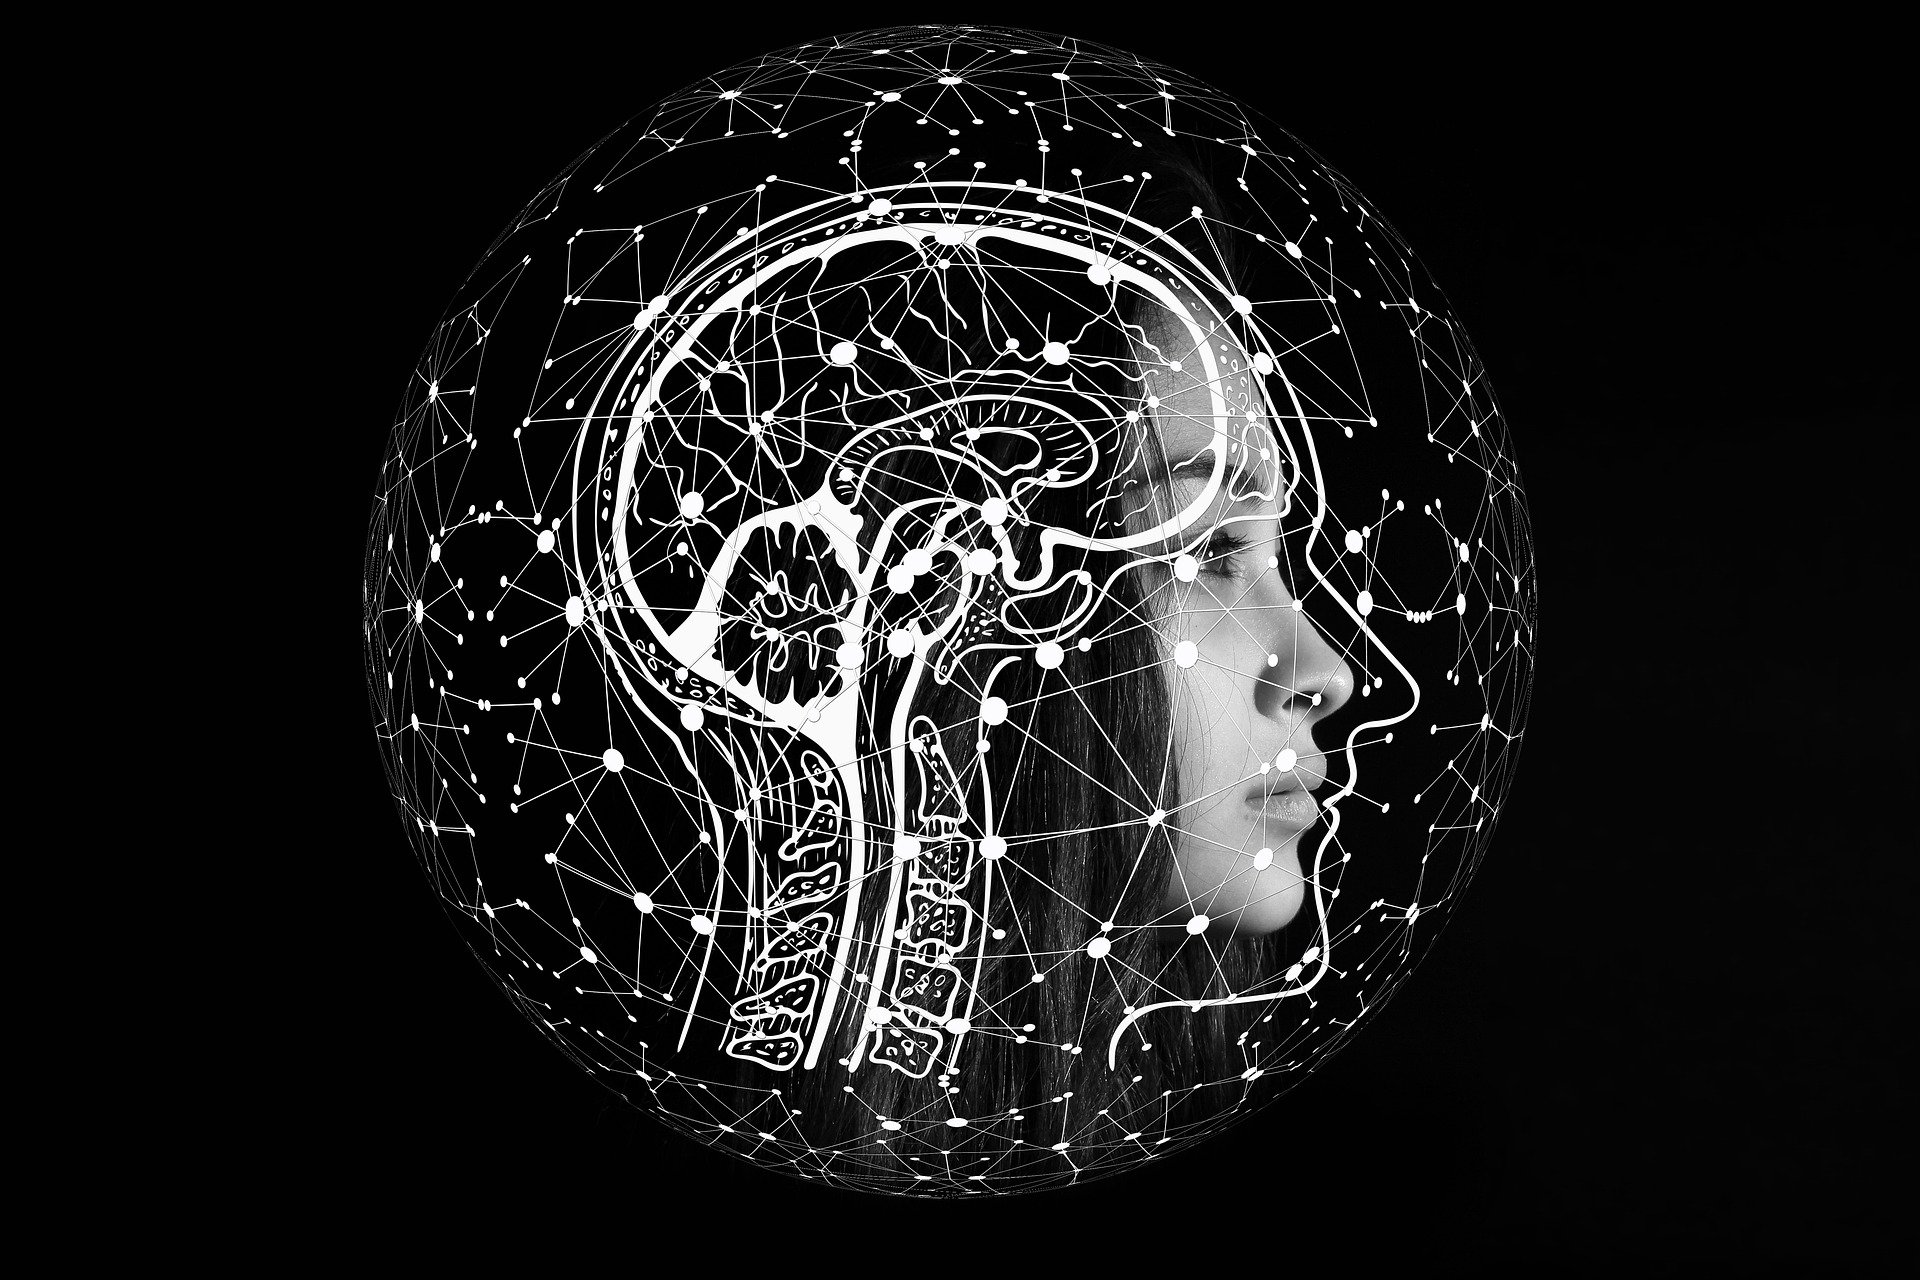 Illustration of a woman's head looking to the right and surrounded by lines from a digital environment. The silhouette of a brain can be seen on her head